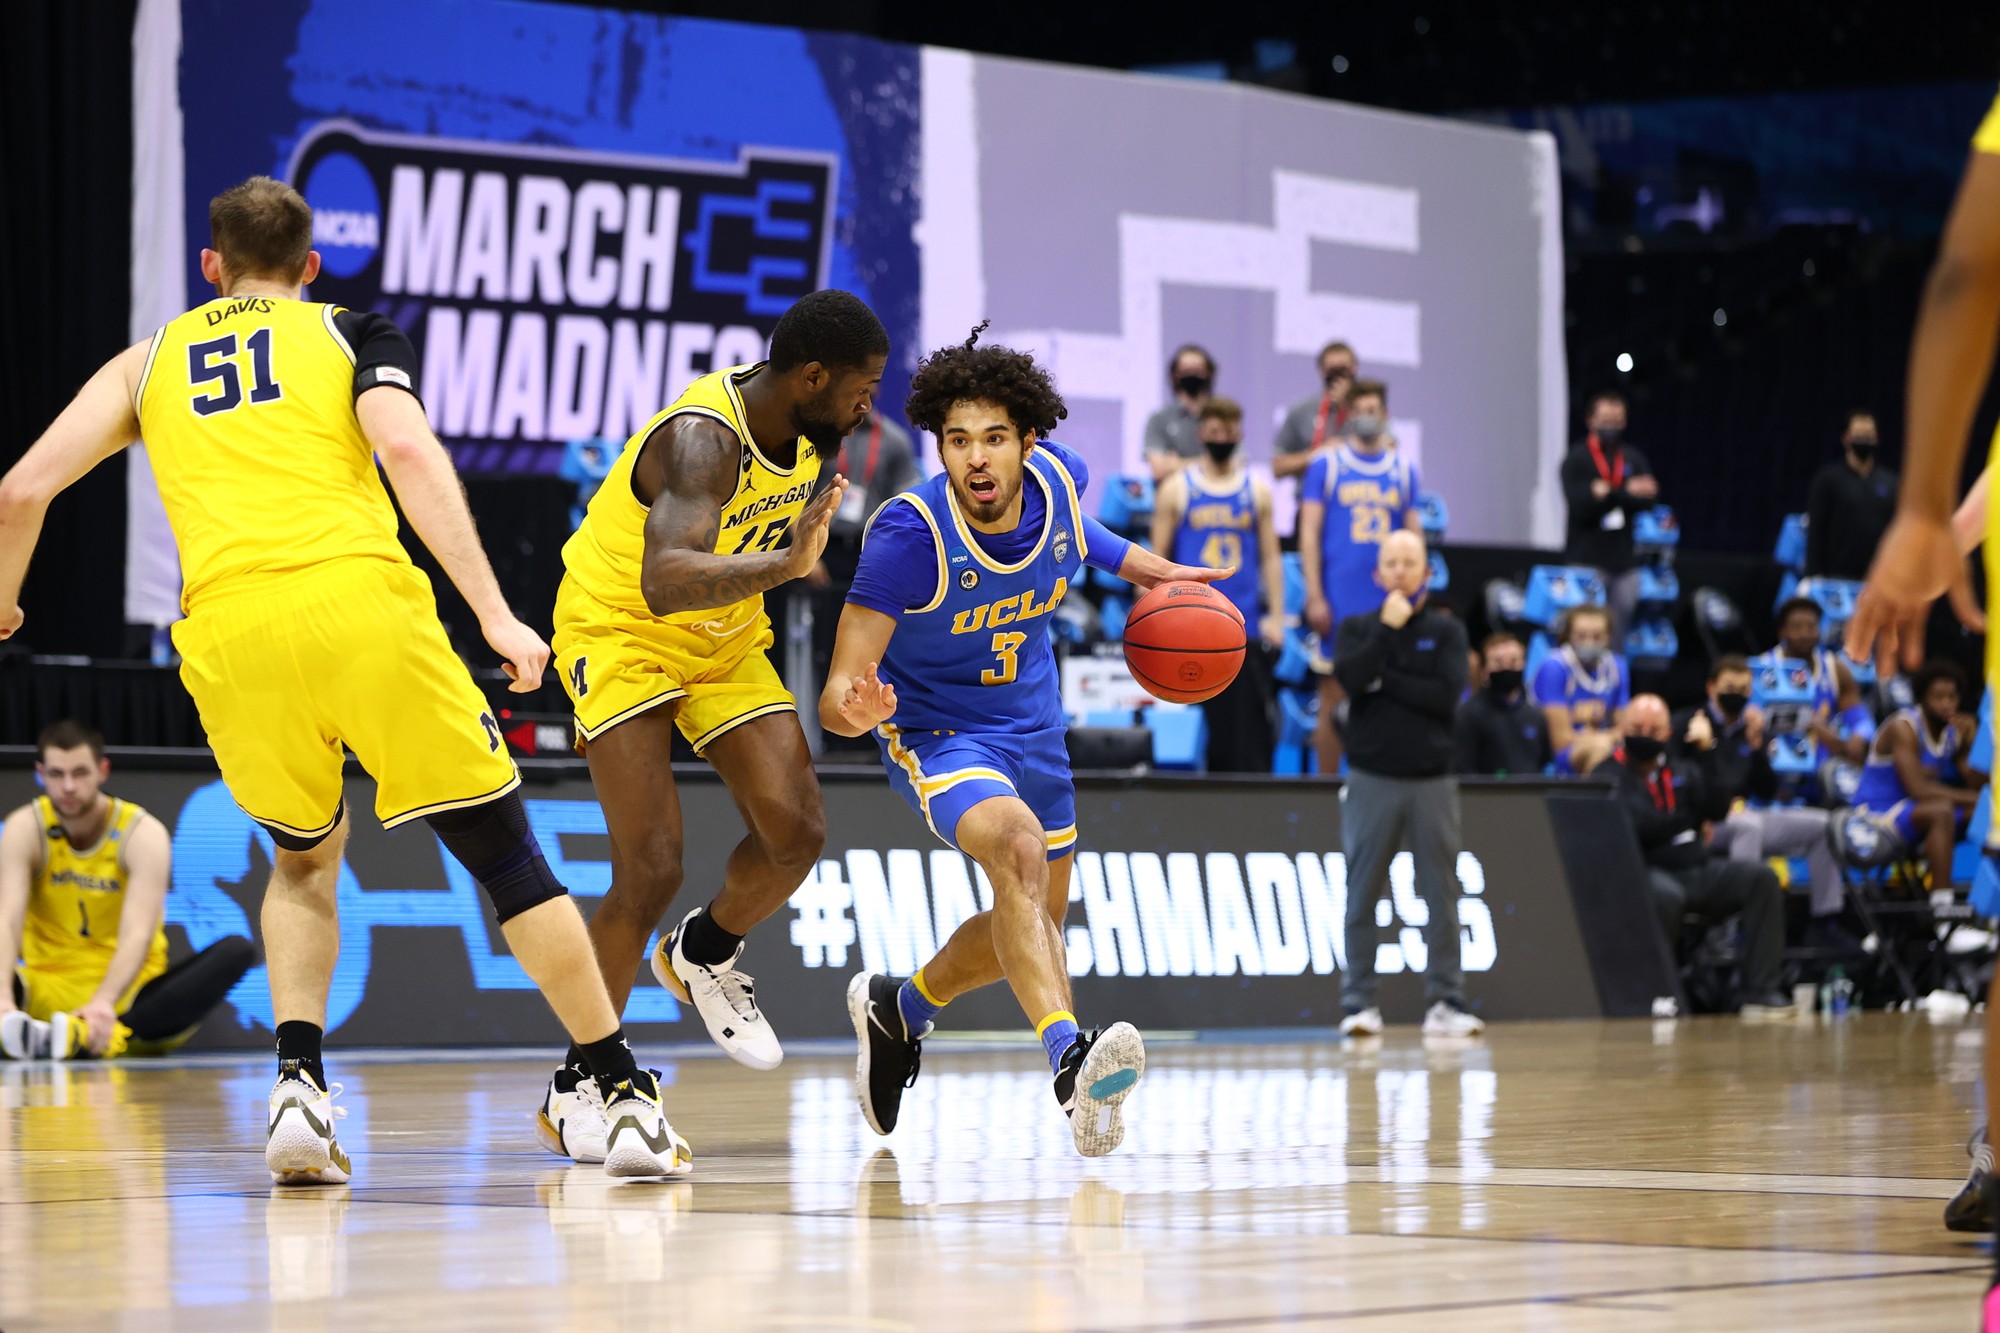 Men’s basketball to meet undefeated No. 1 seed Gonzaga in Final Four match Daily Bruin